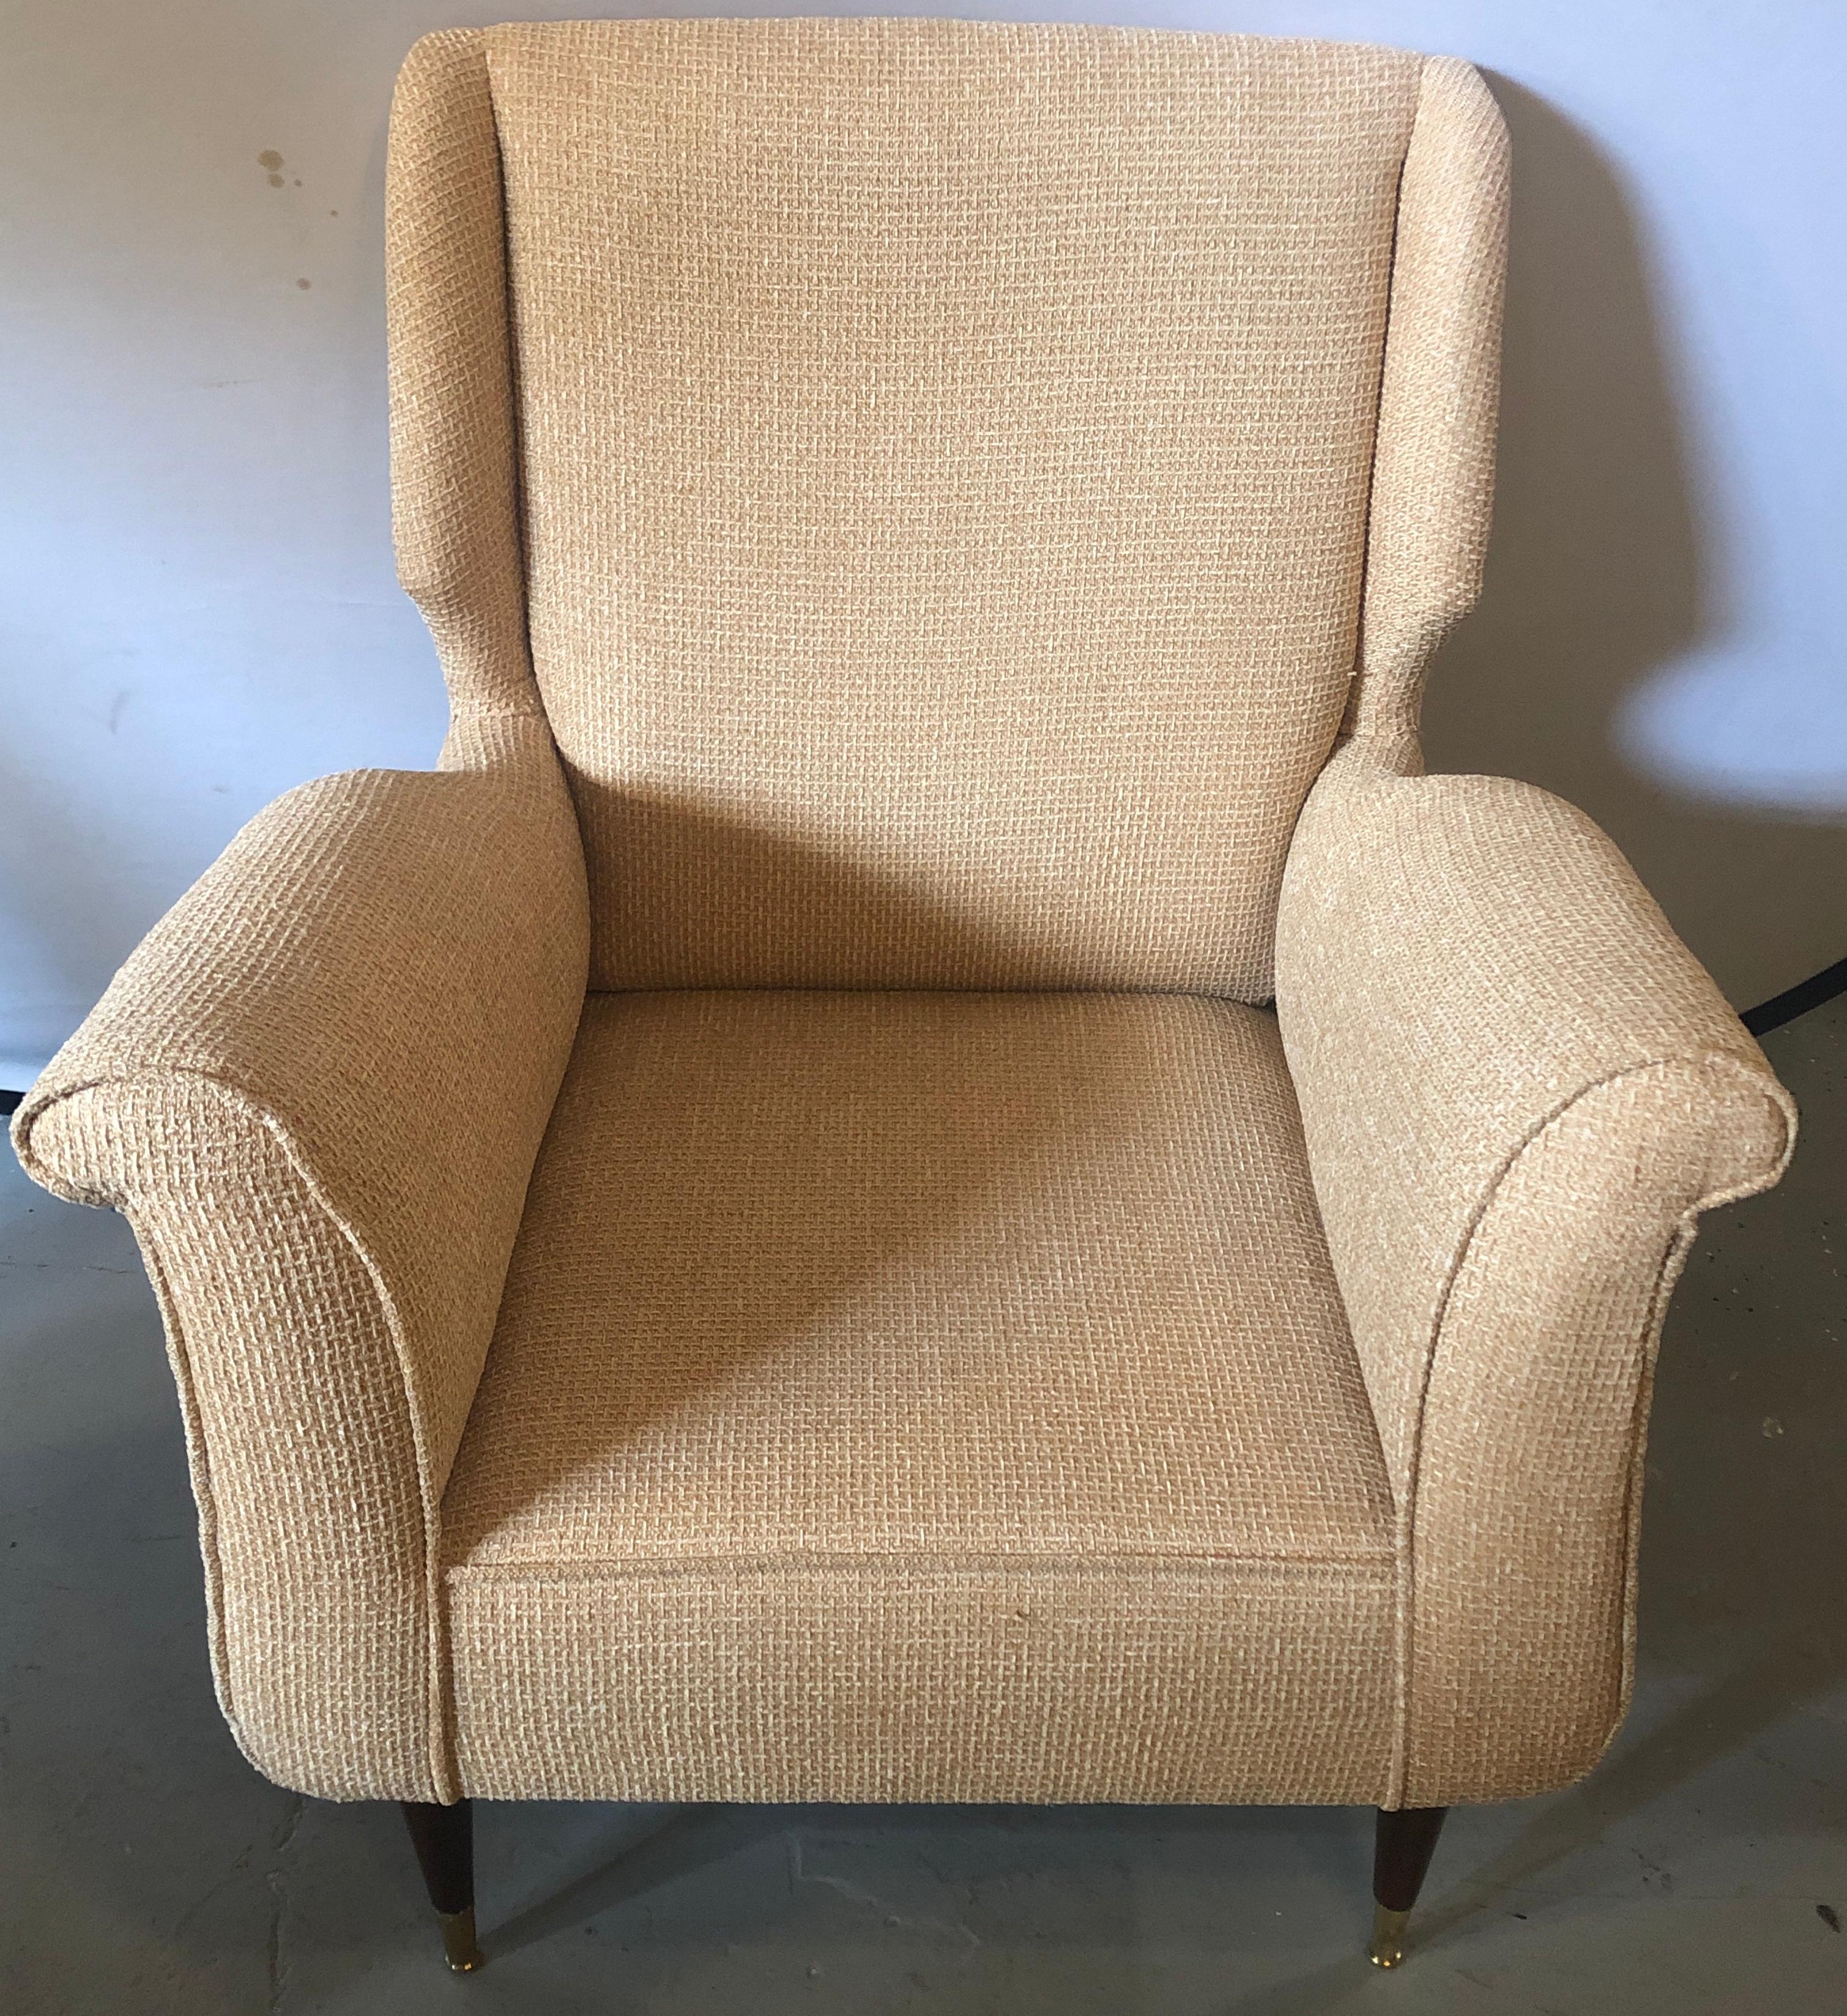 20th Century Pair of Mid-Century Modern Gio Ponti Style Arm, Bergere or Wing Back Chairs